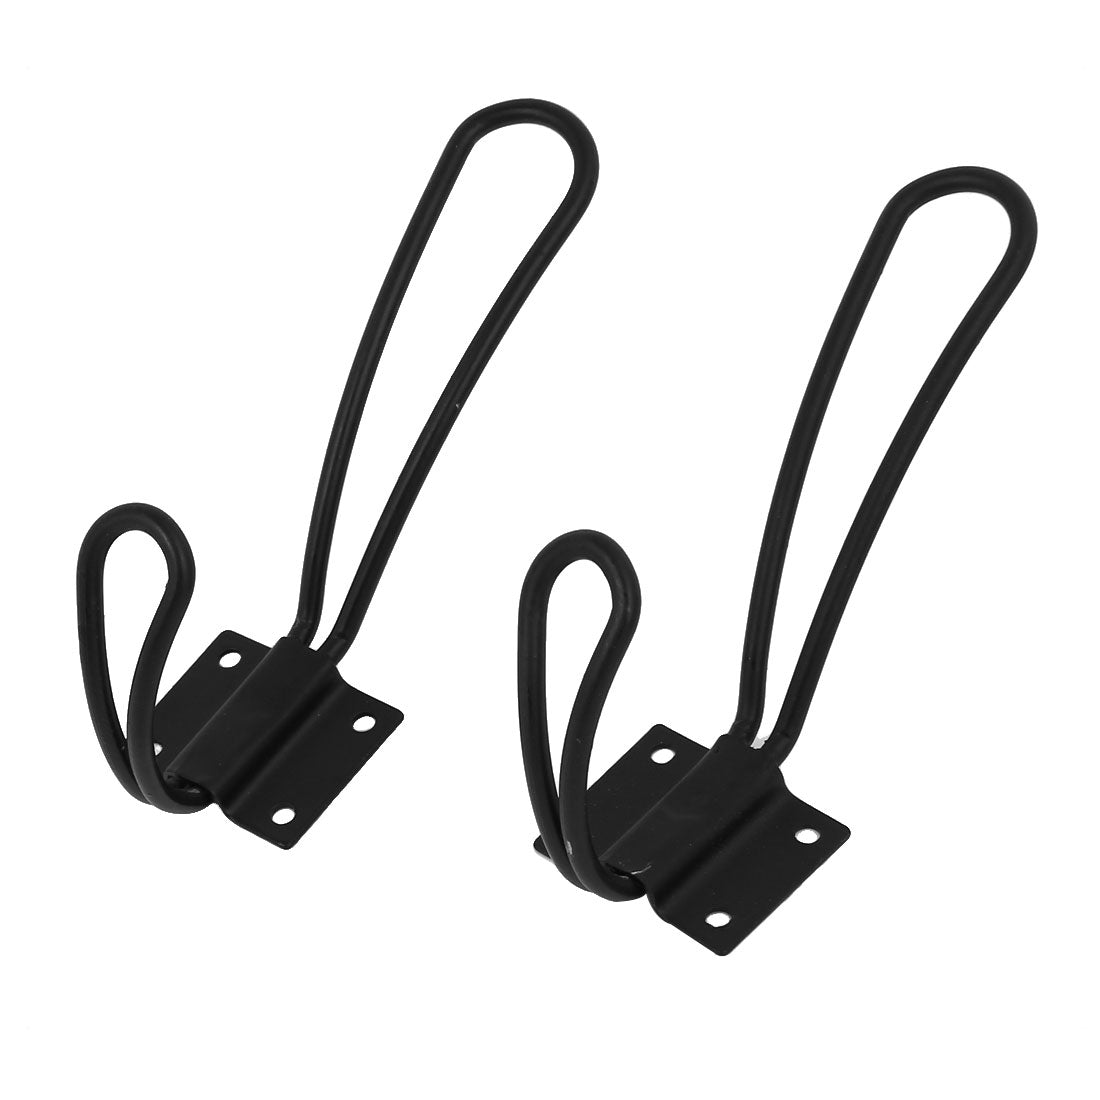 uxcell Uxcell Clothes Towels Display Wall Mounted Hanger Hook Bracket Black 2pcs